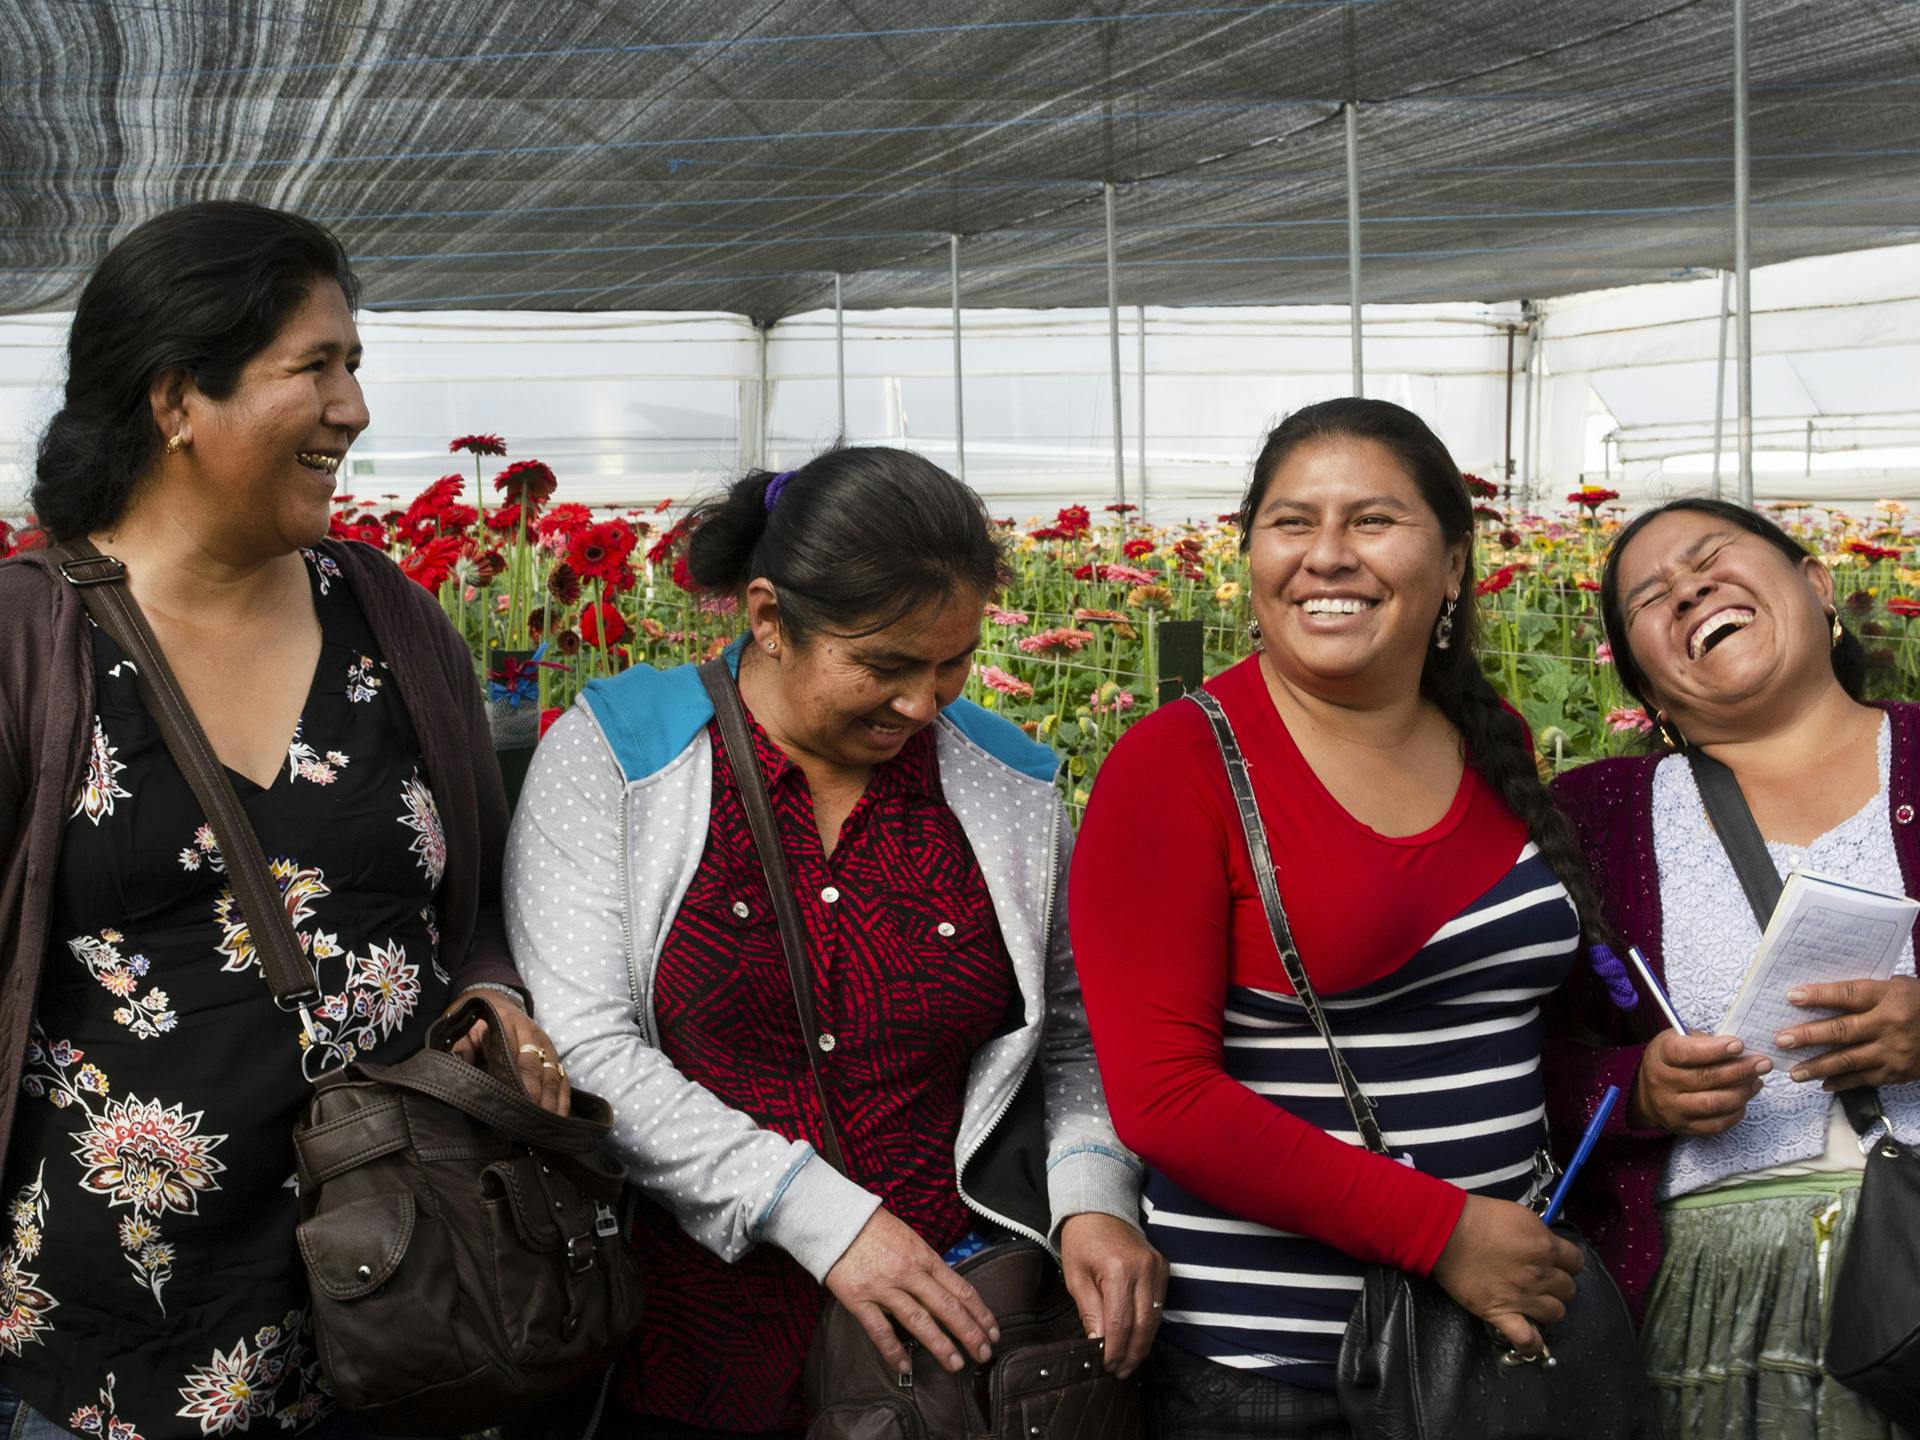 Women in Bolivia standing in a greenhouse